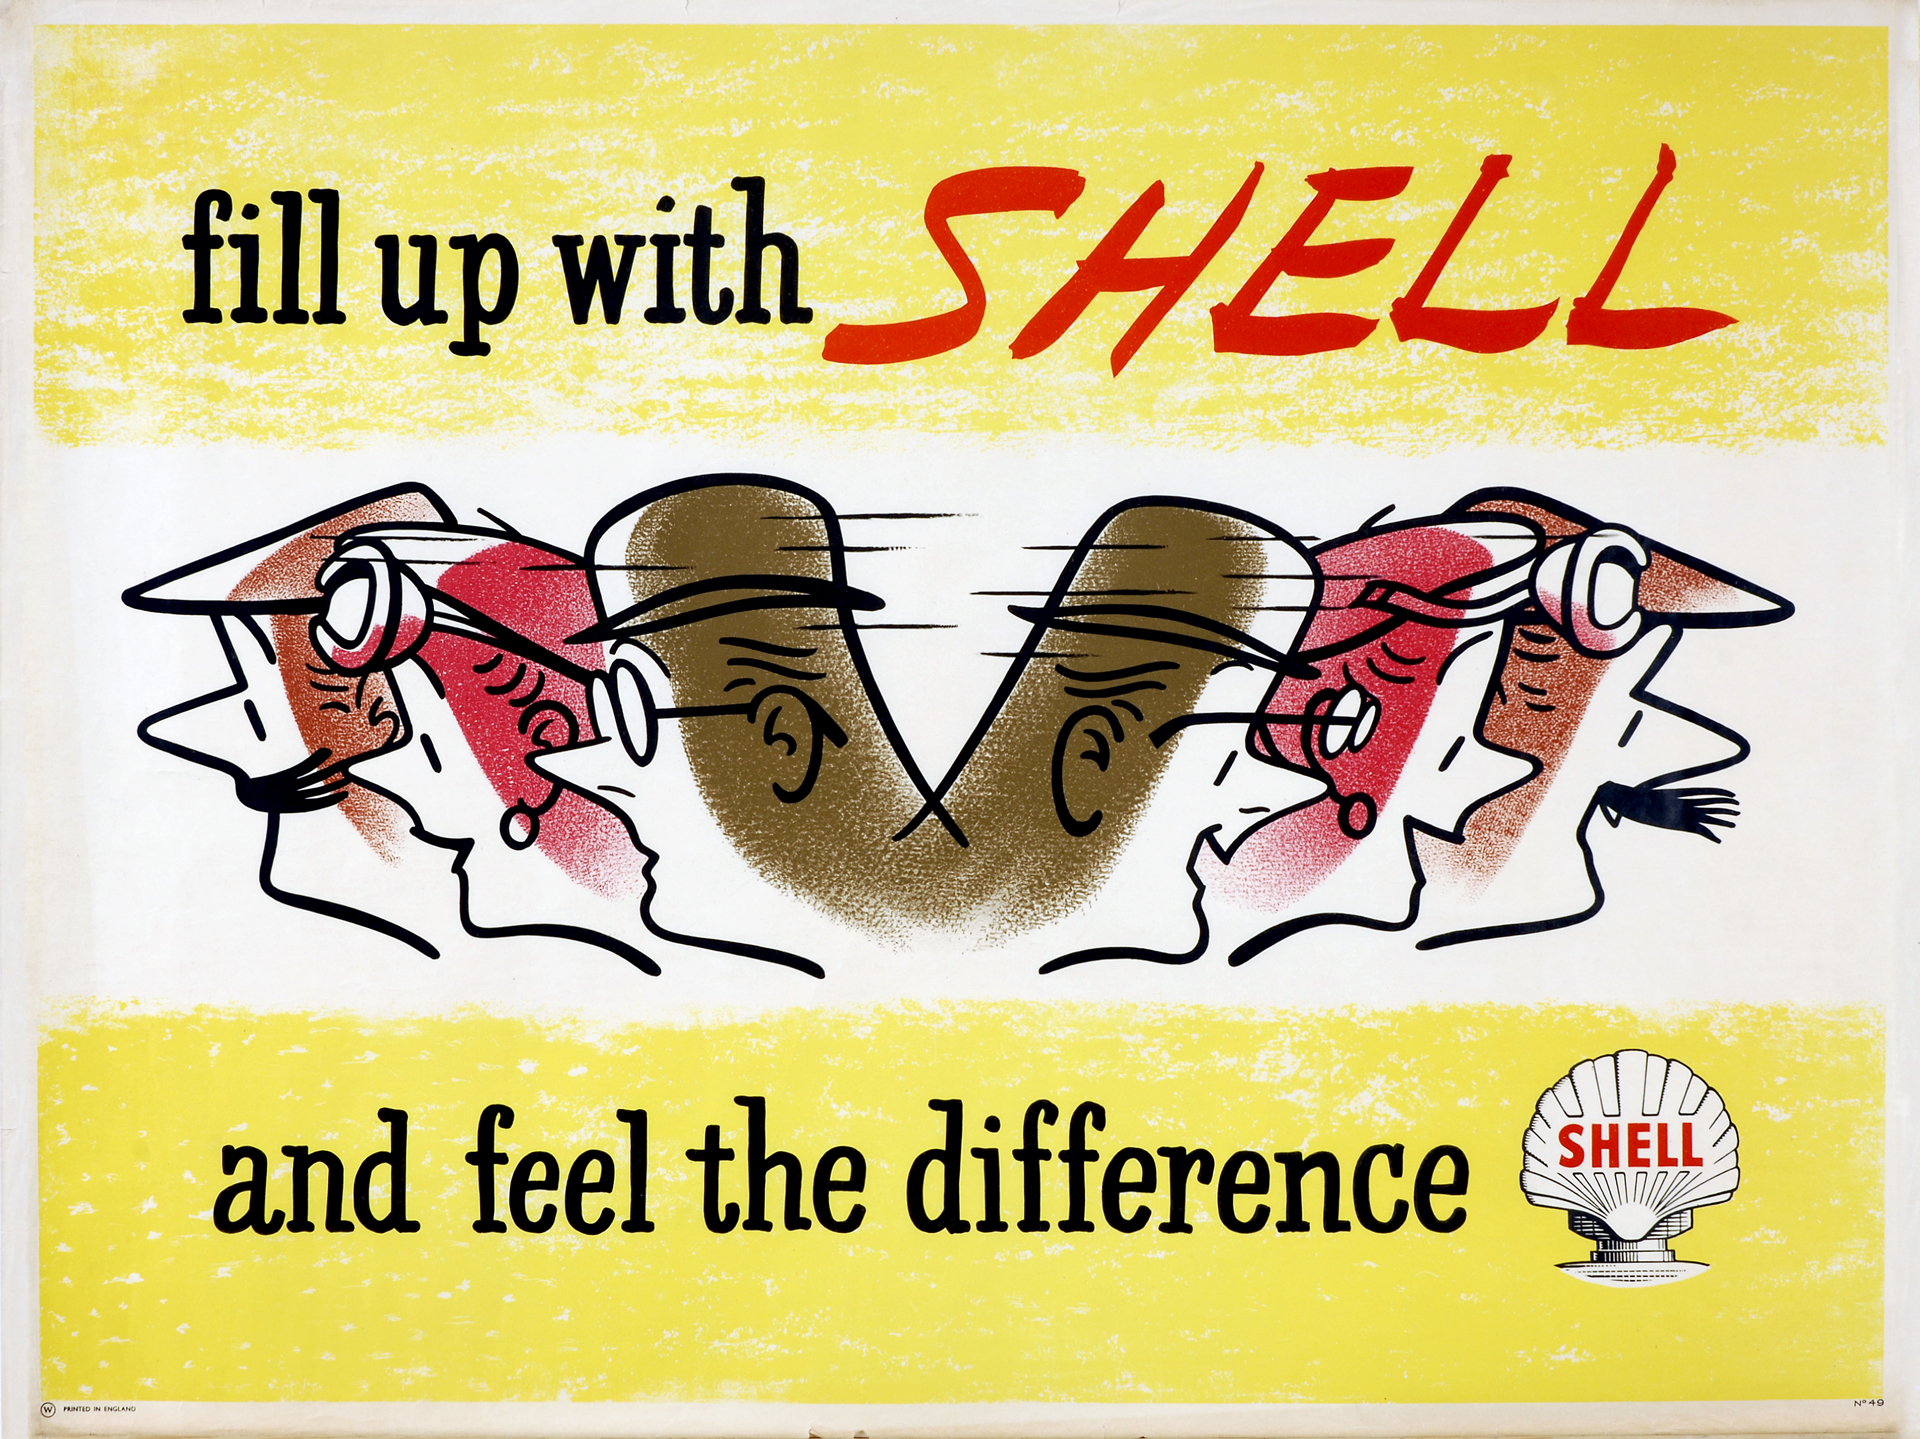 Poster of Fill up with Shell, 1952